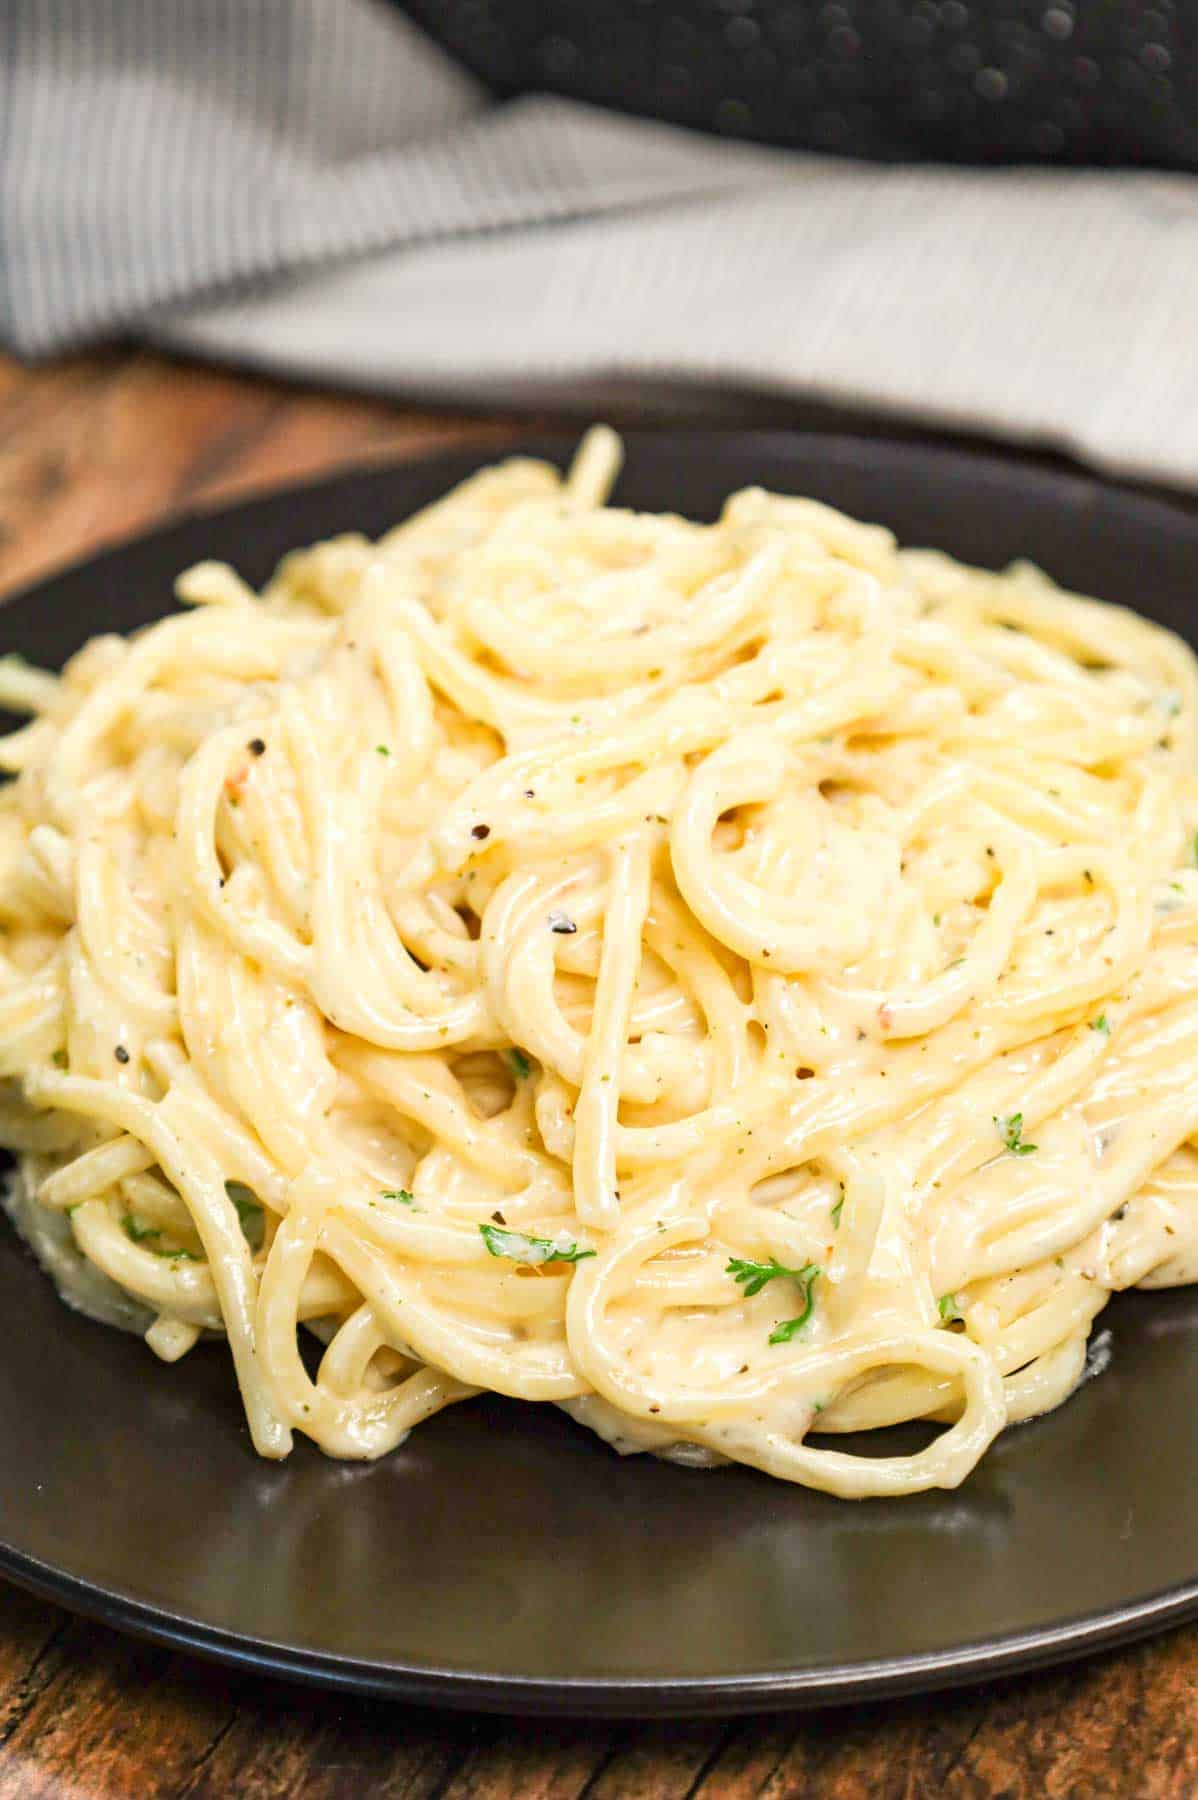 Spaghetti Alfredo is rich and creamy pasta recipe made with butter, minced garlic, heavy cream, Italian seasoning and shredded parmesan cheese.